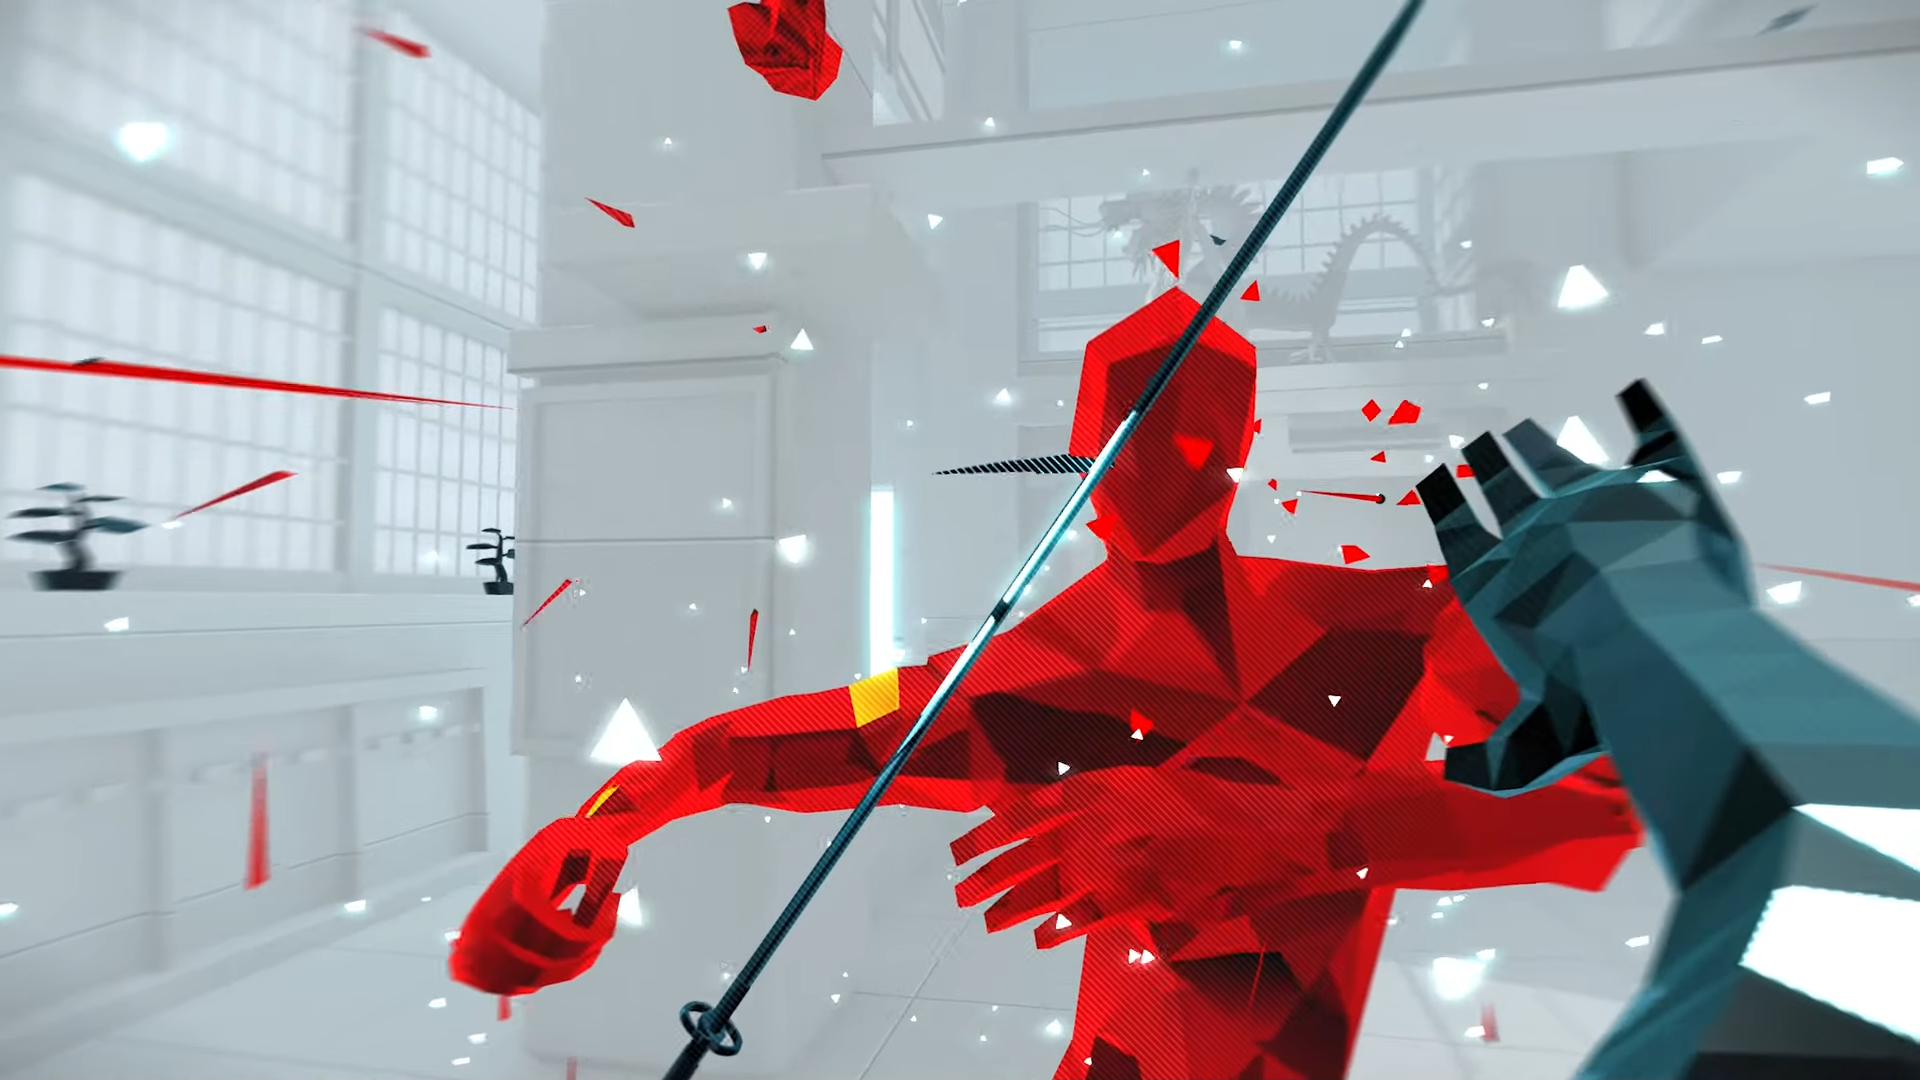 Xbox Game Pass serves up seven more games for February, including Superhot